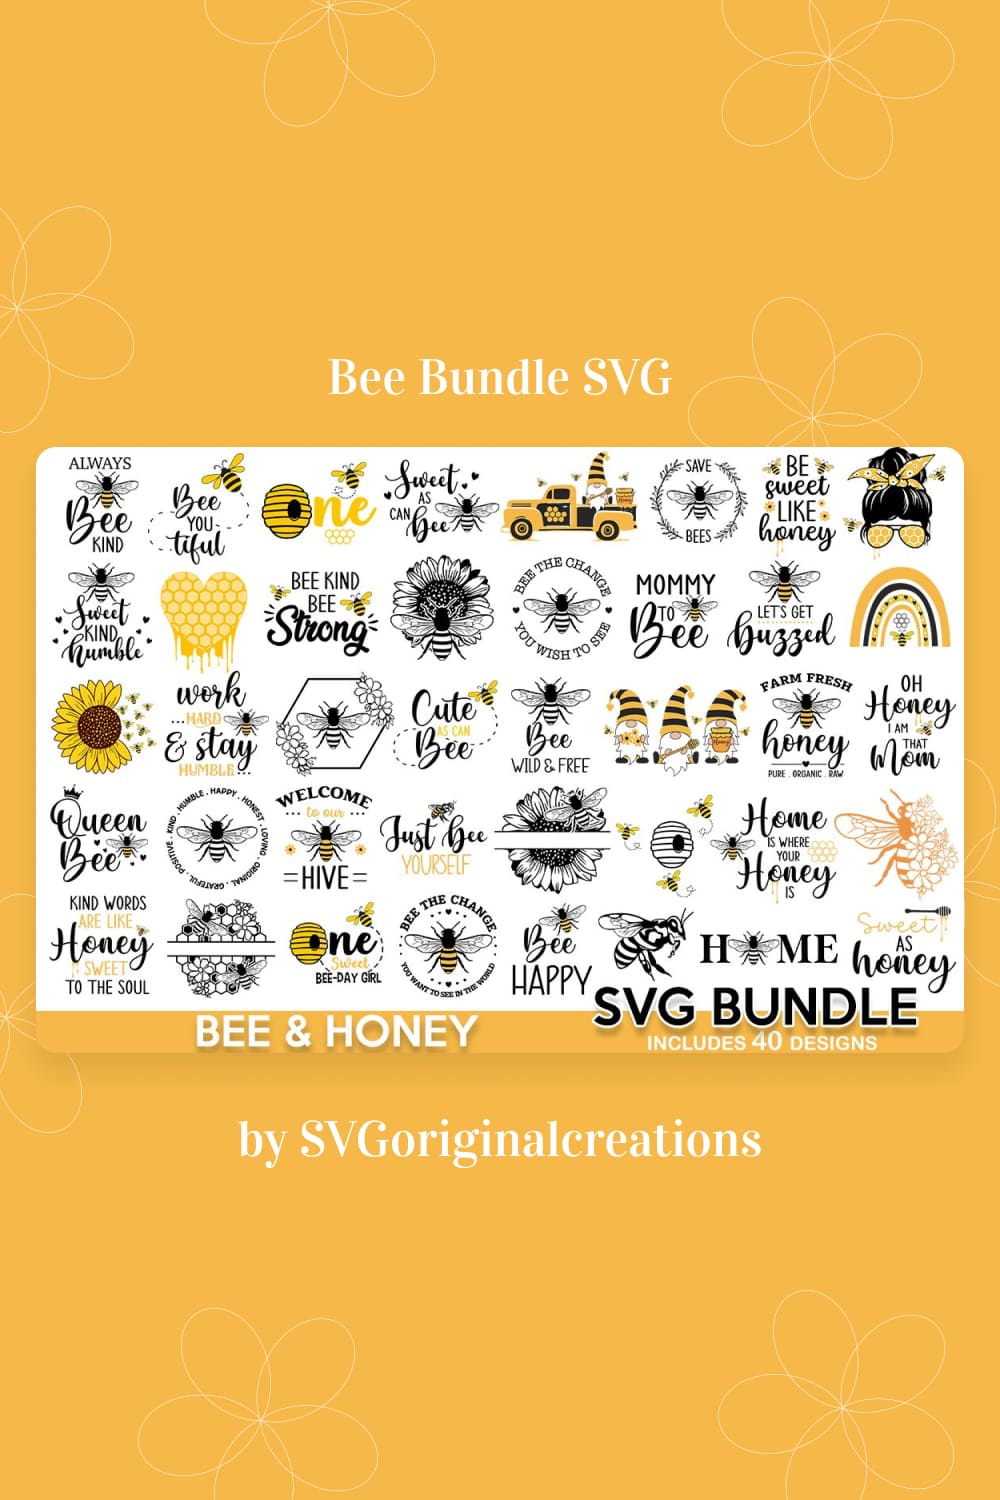 Bee Bundle SVG preview of Pinterest image.